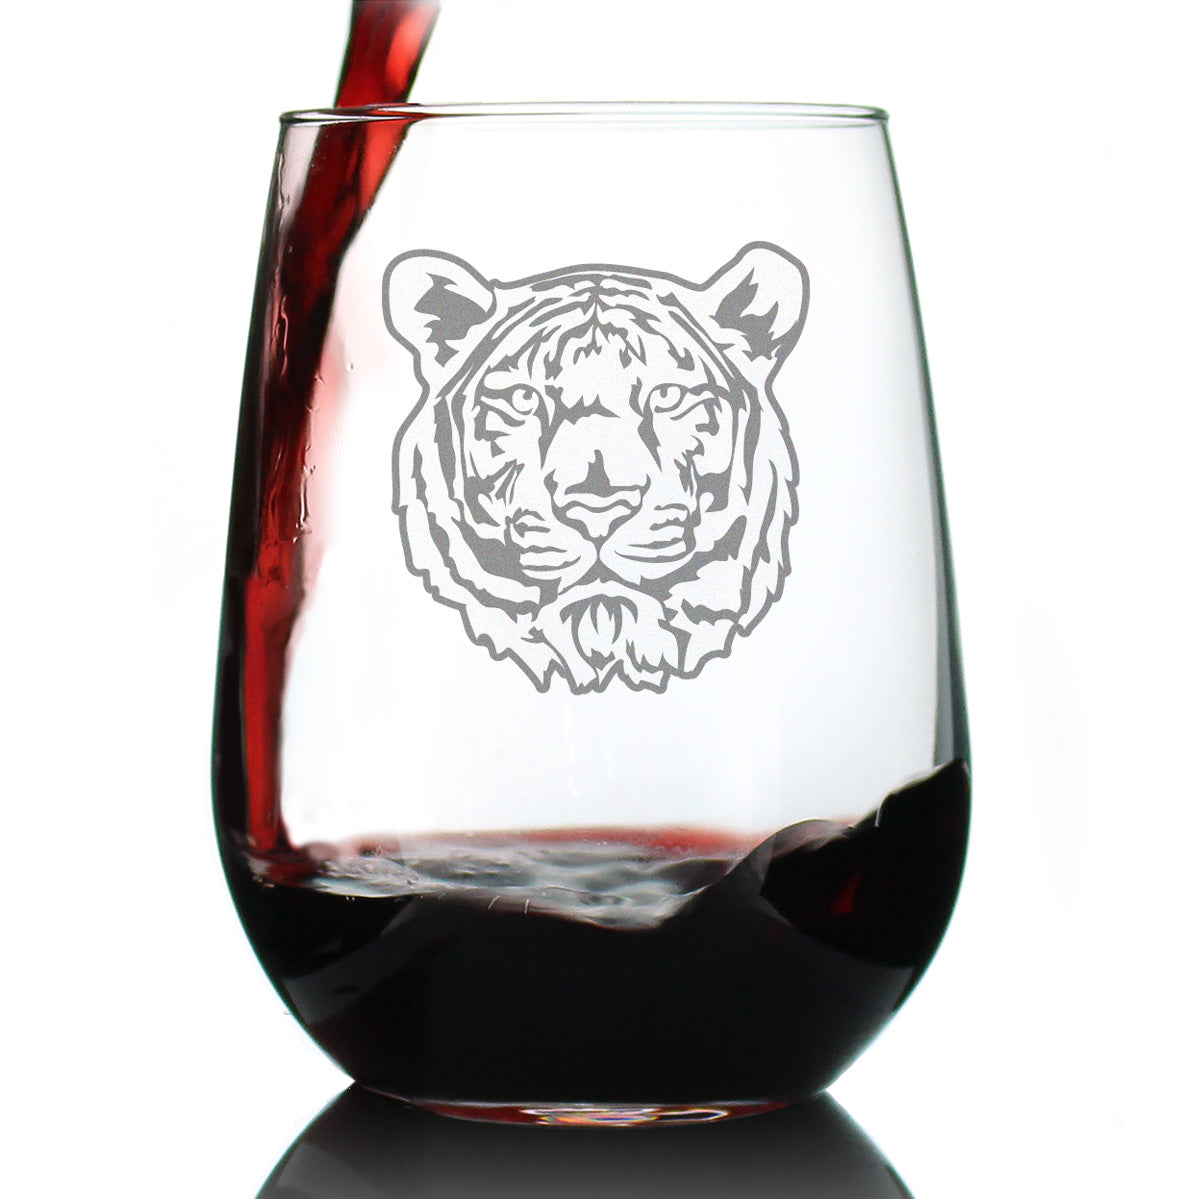 Tiger Face Stemless Wine Glass - Cute Tiger Themed Decor and Gifts for Animal Lovers - Large 17 Oz Glasses